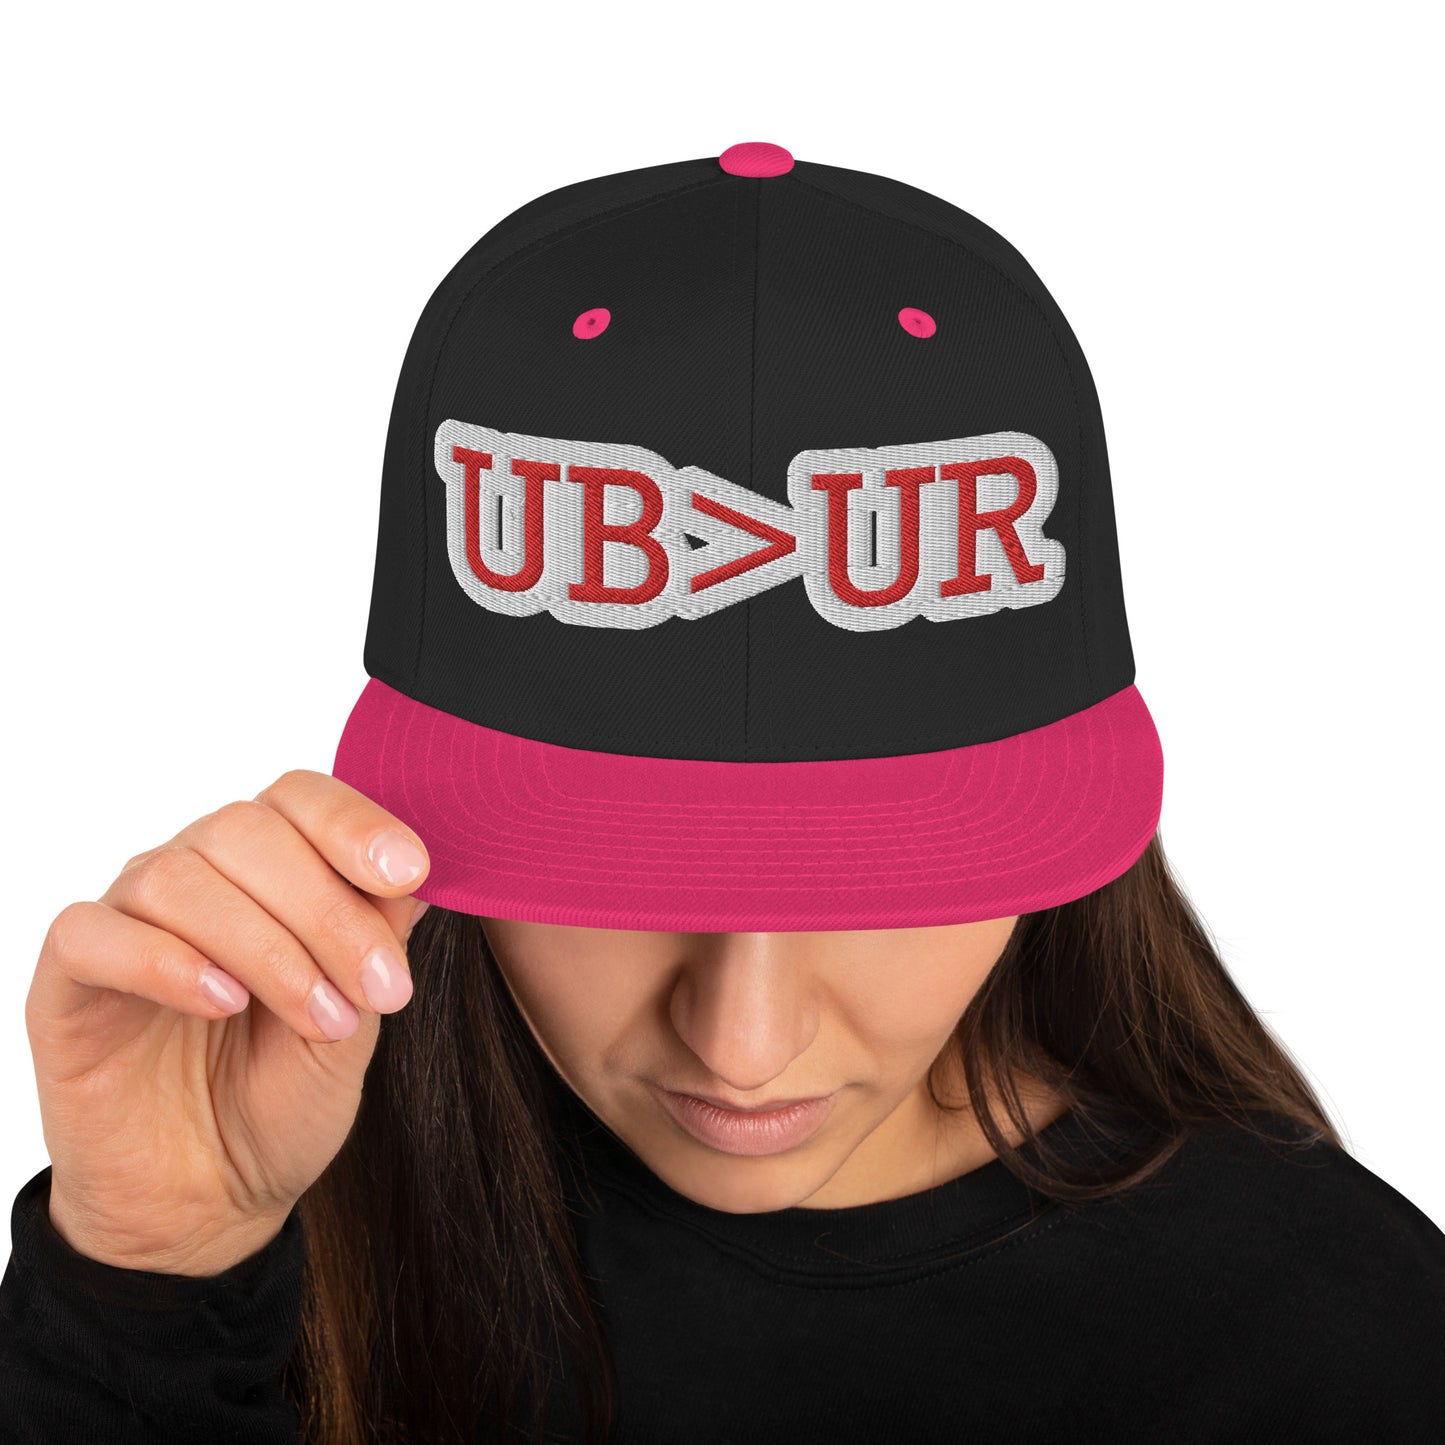 UBUR-Snapback Hat, white and red letters